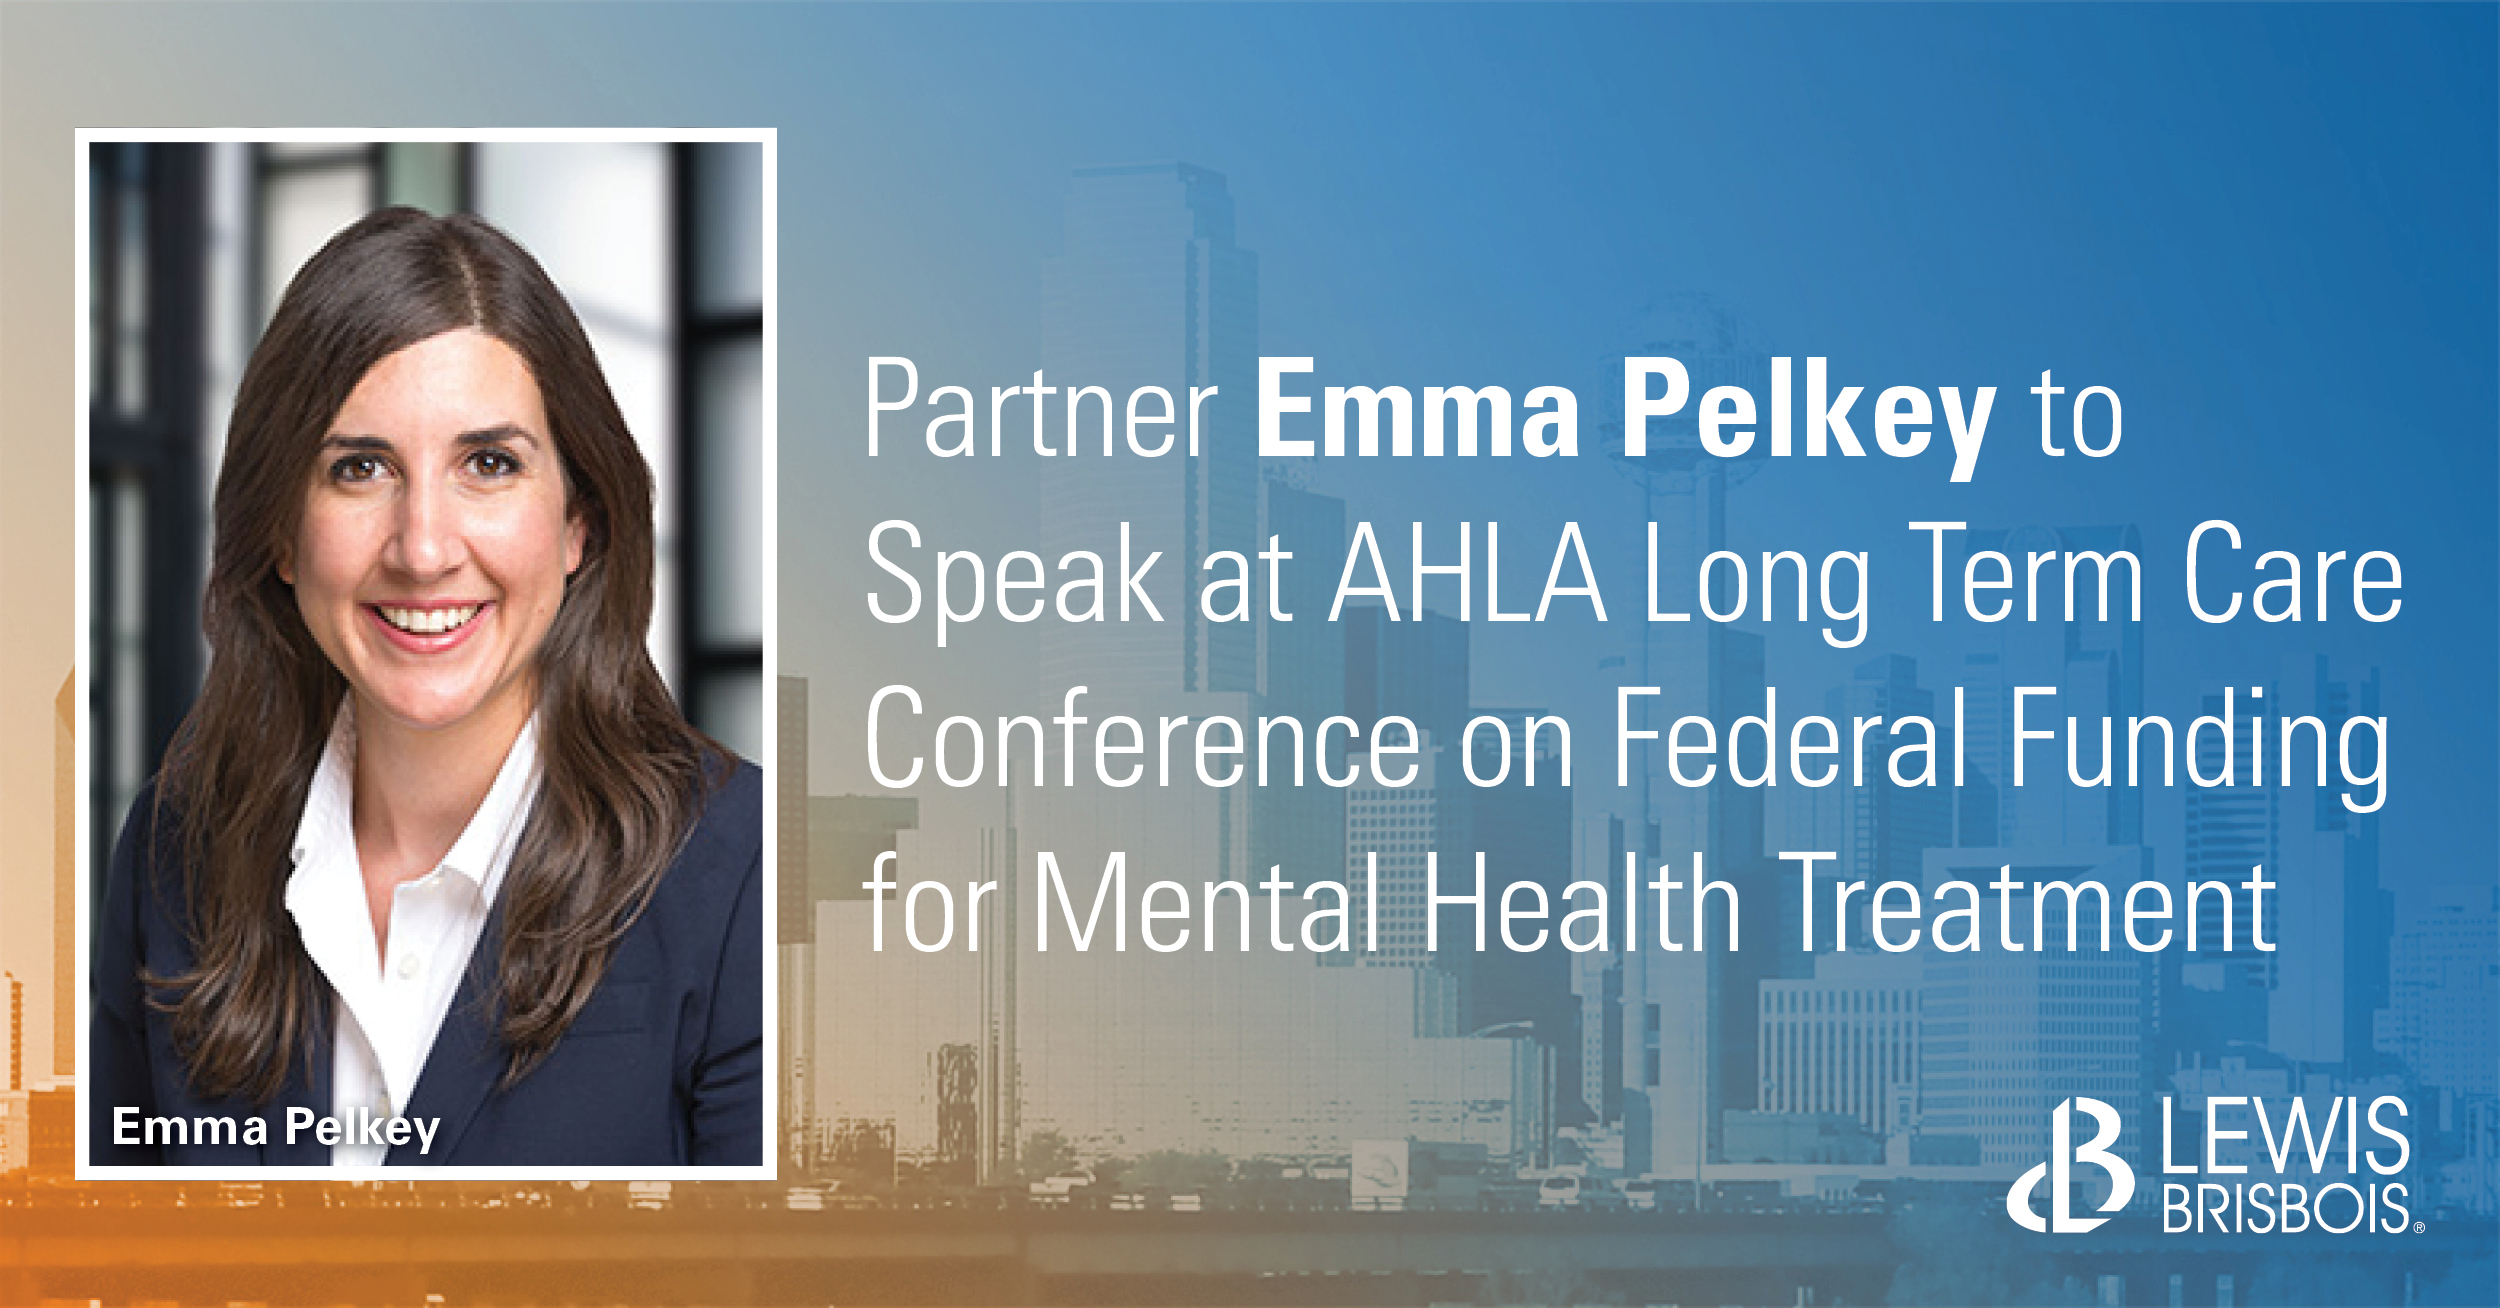 Emma Pelkey to Speak at AHLA Long Term Care Conference on Federal